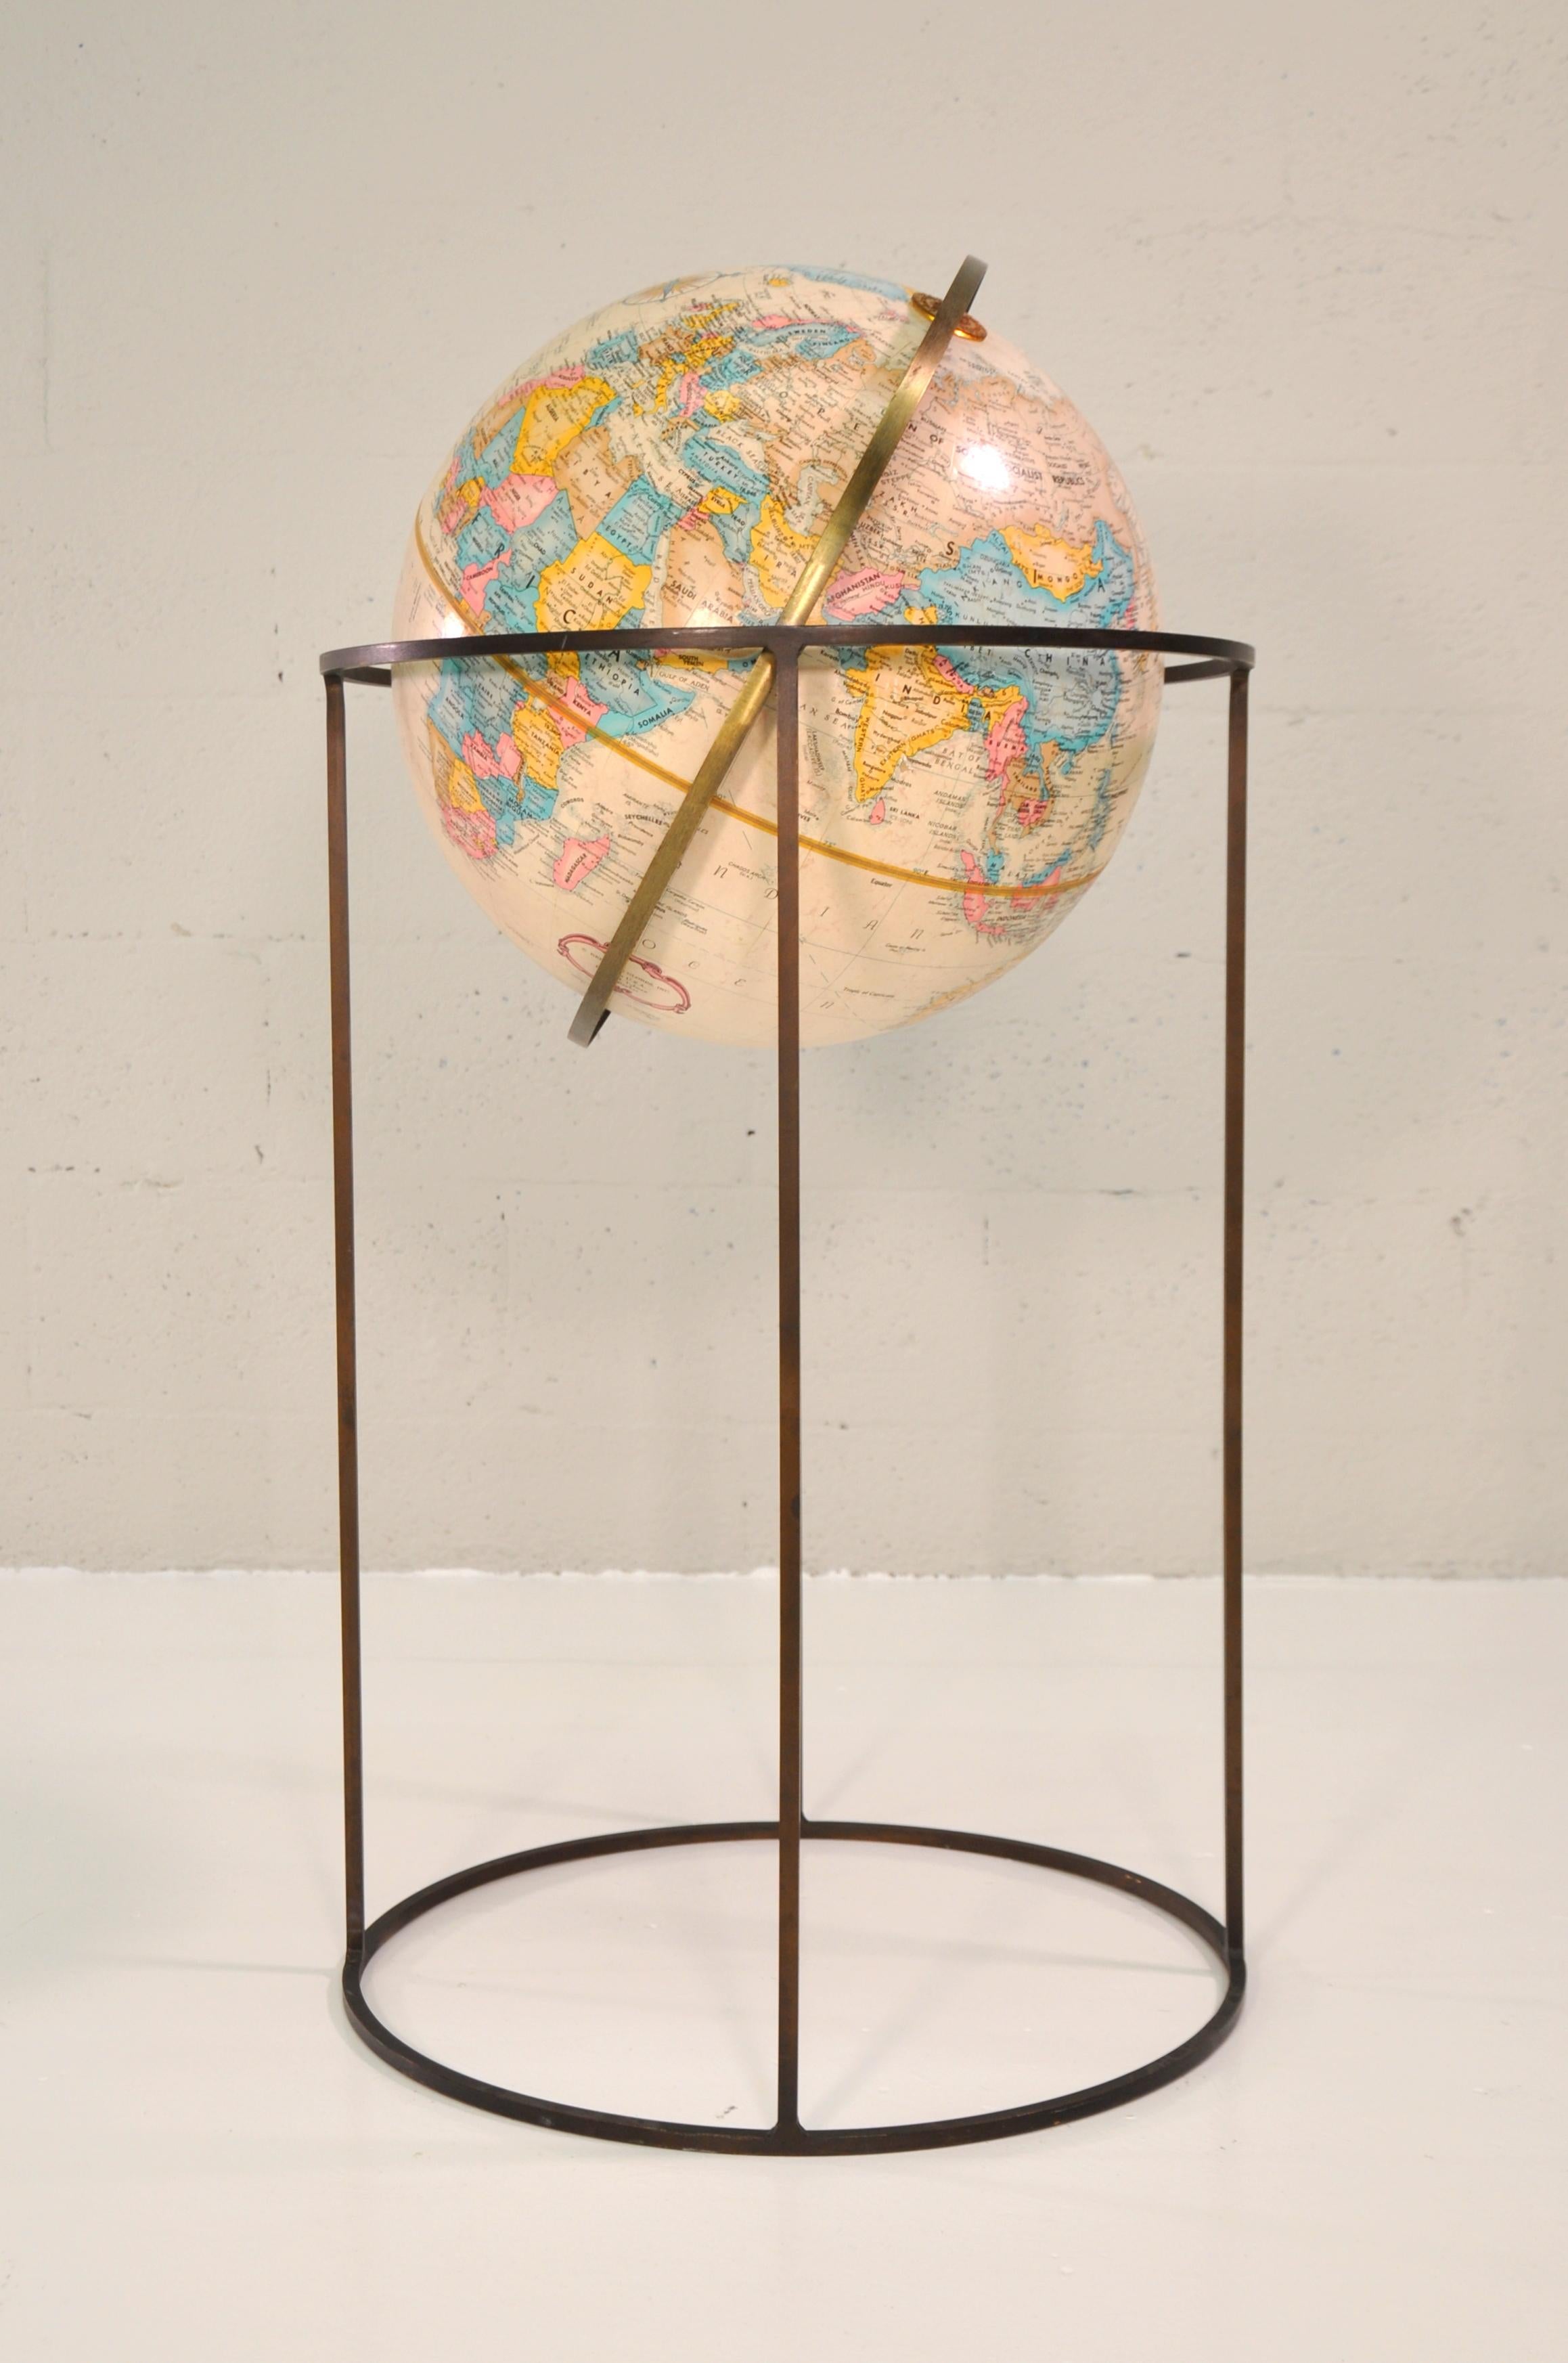 World globe by Replogle in the style of Paul McCobb, USA, circa 1970. Signed.
Beige globe supported by swivel stand in antiqued brass. Featuring square tube design made popular by McCobb.